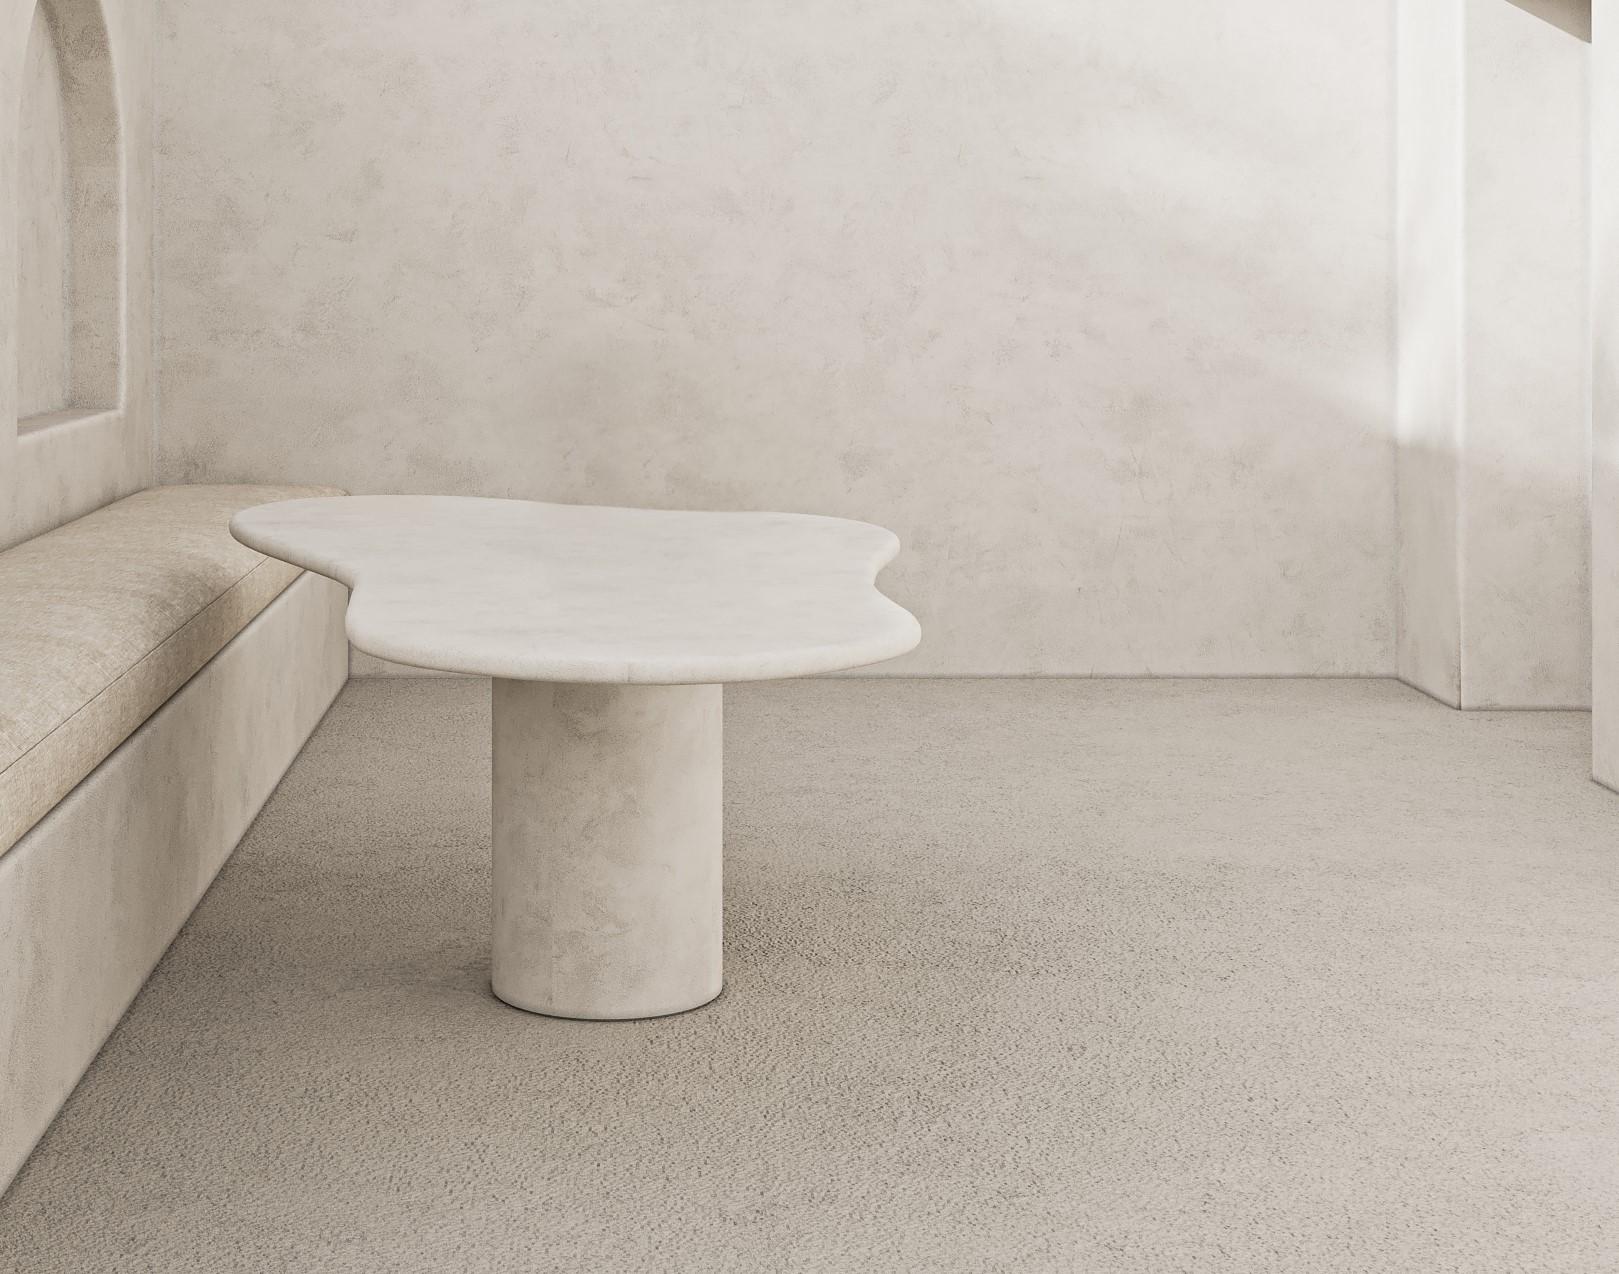 Aimi Dining Table by Kasanai
Dimensions: D 100 x W 200 x H 76 cm.
Materials: Lime plaster.
Also available in different dimensions and colors. Please contact us.

Aimi’s organic, free flowing shape is a real showpiece and a great focal point for any